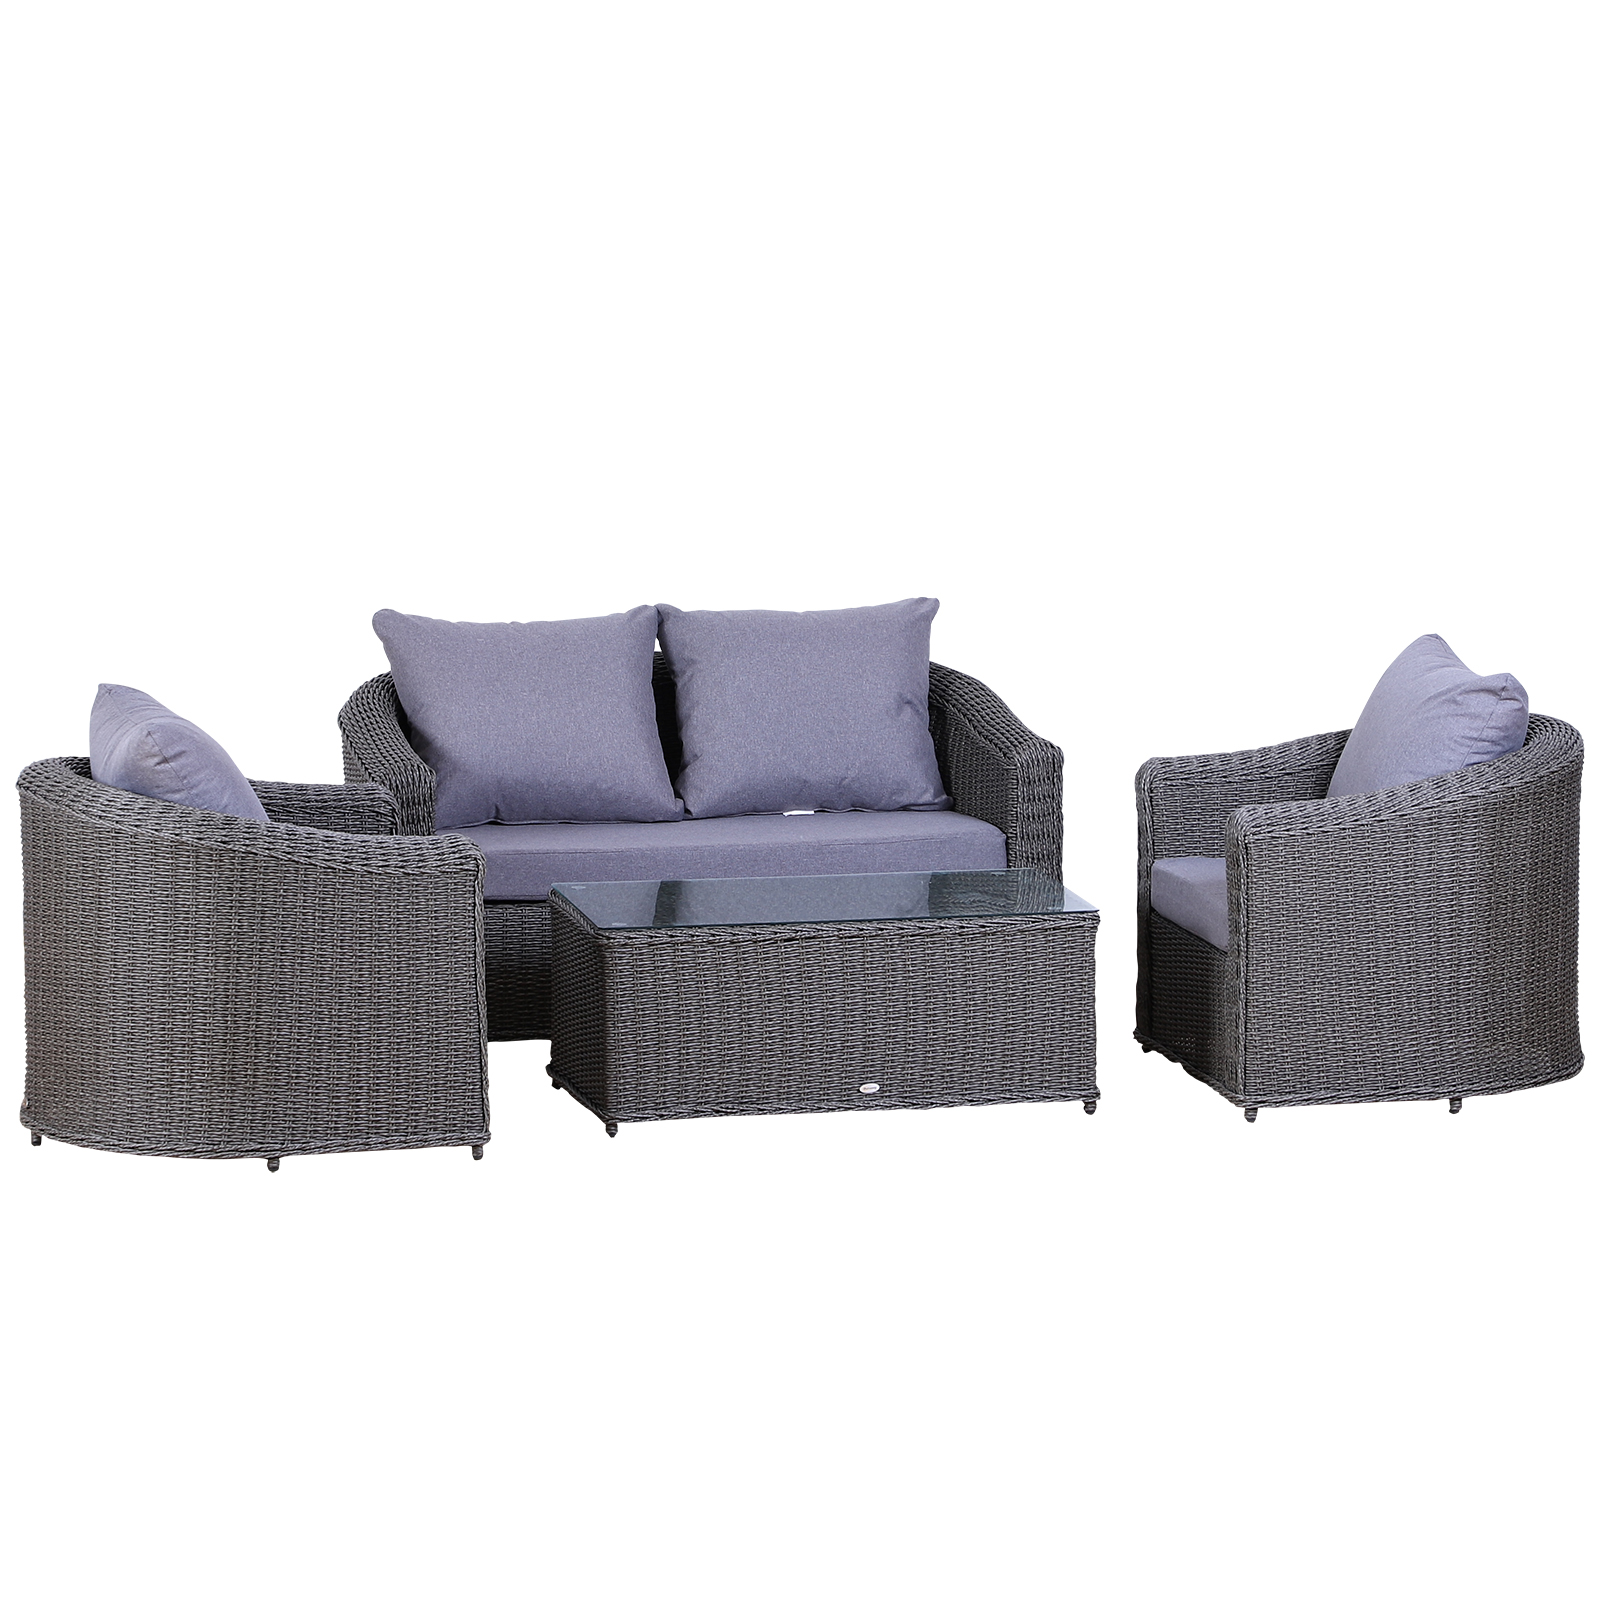 Outsunny Deluxe Garden Rattan Furniture Set 4-seater Sofa Set Coffee Table  Single Chair Bench Wicker Weave Patio Aluminium Frame Fully-assembly - Grey